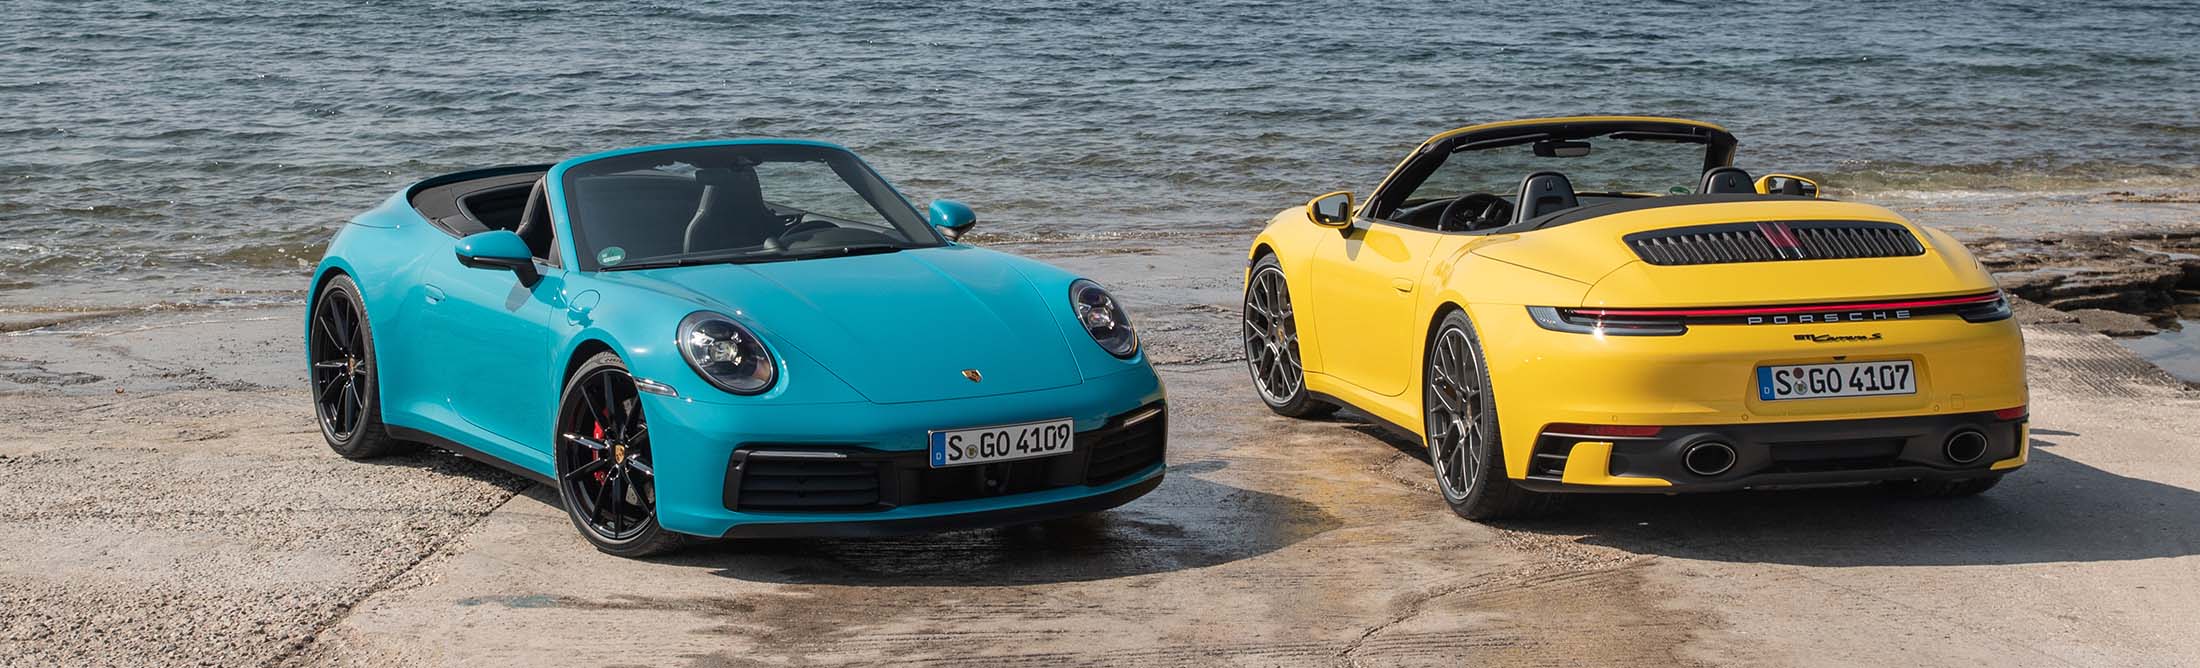 2020 Porsche 911 Carrera 4S Cabriolet Review: Options to Get - Bloomberg